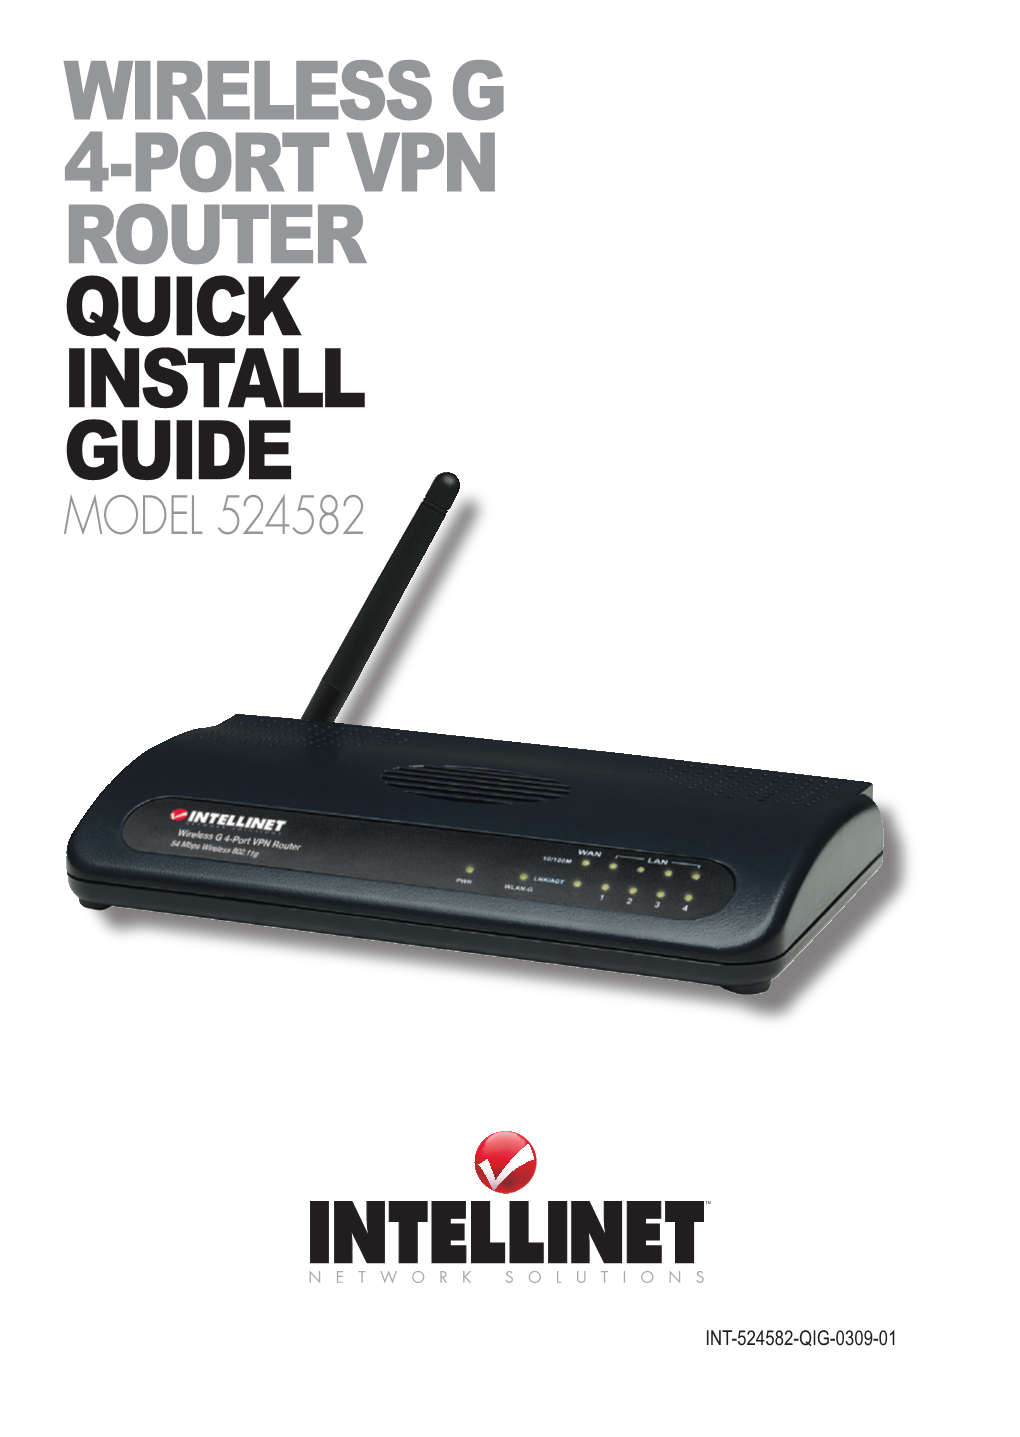 Wireless G 4-Port VPN Router Quick Install Guide Model 524582